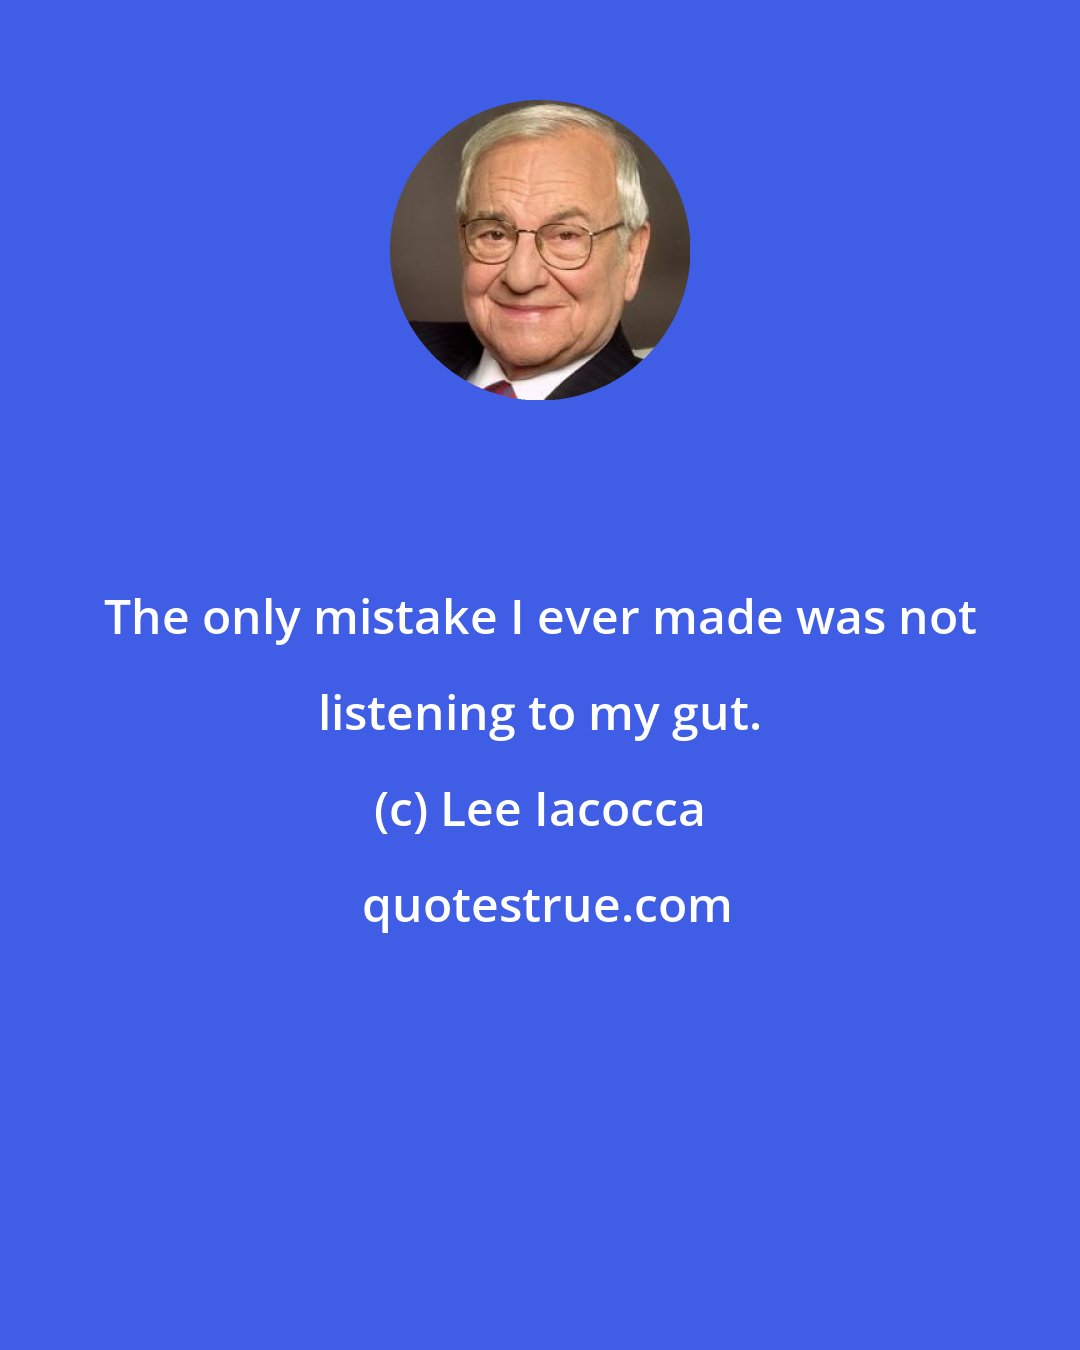 Lee Iacocca: The only mistake I ever made was not listening to my gut.